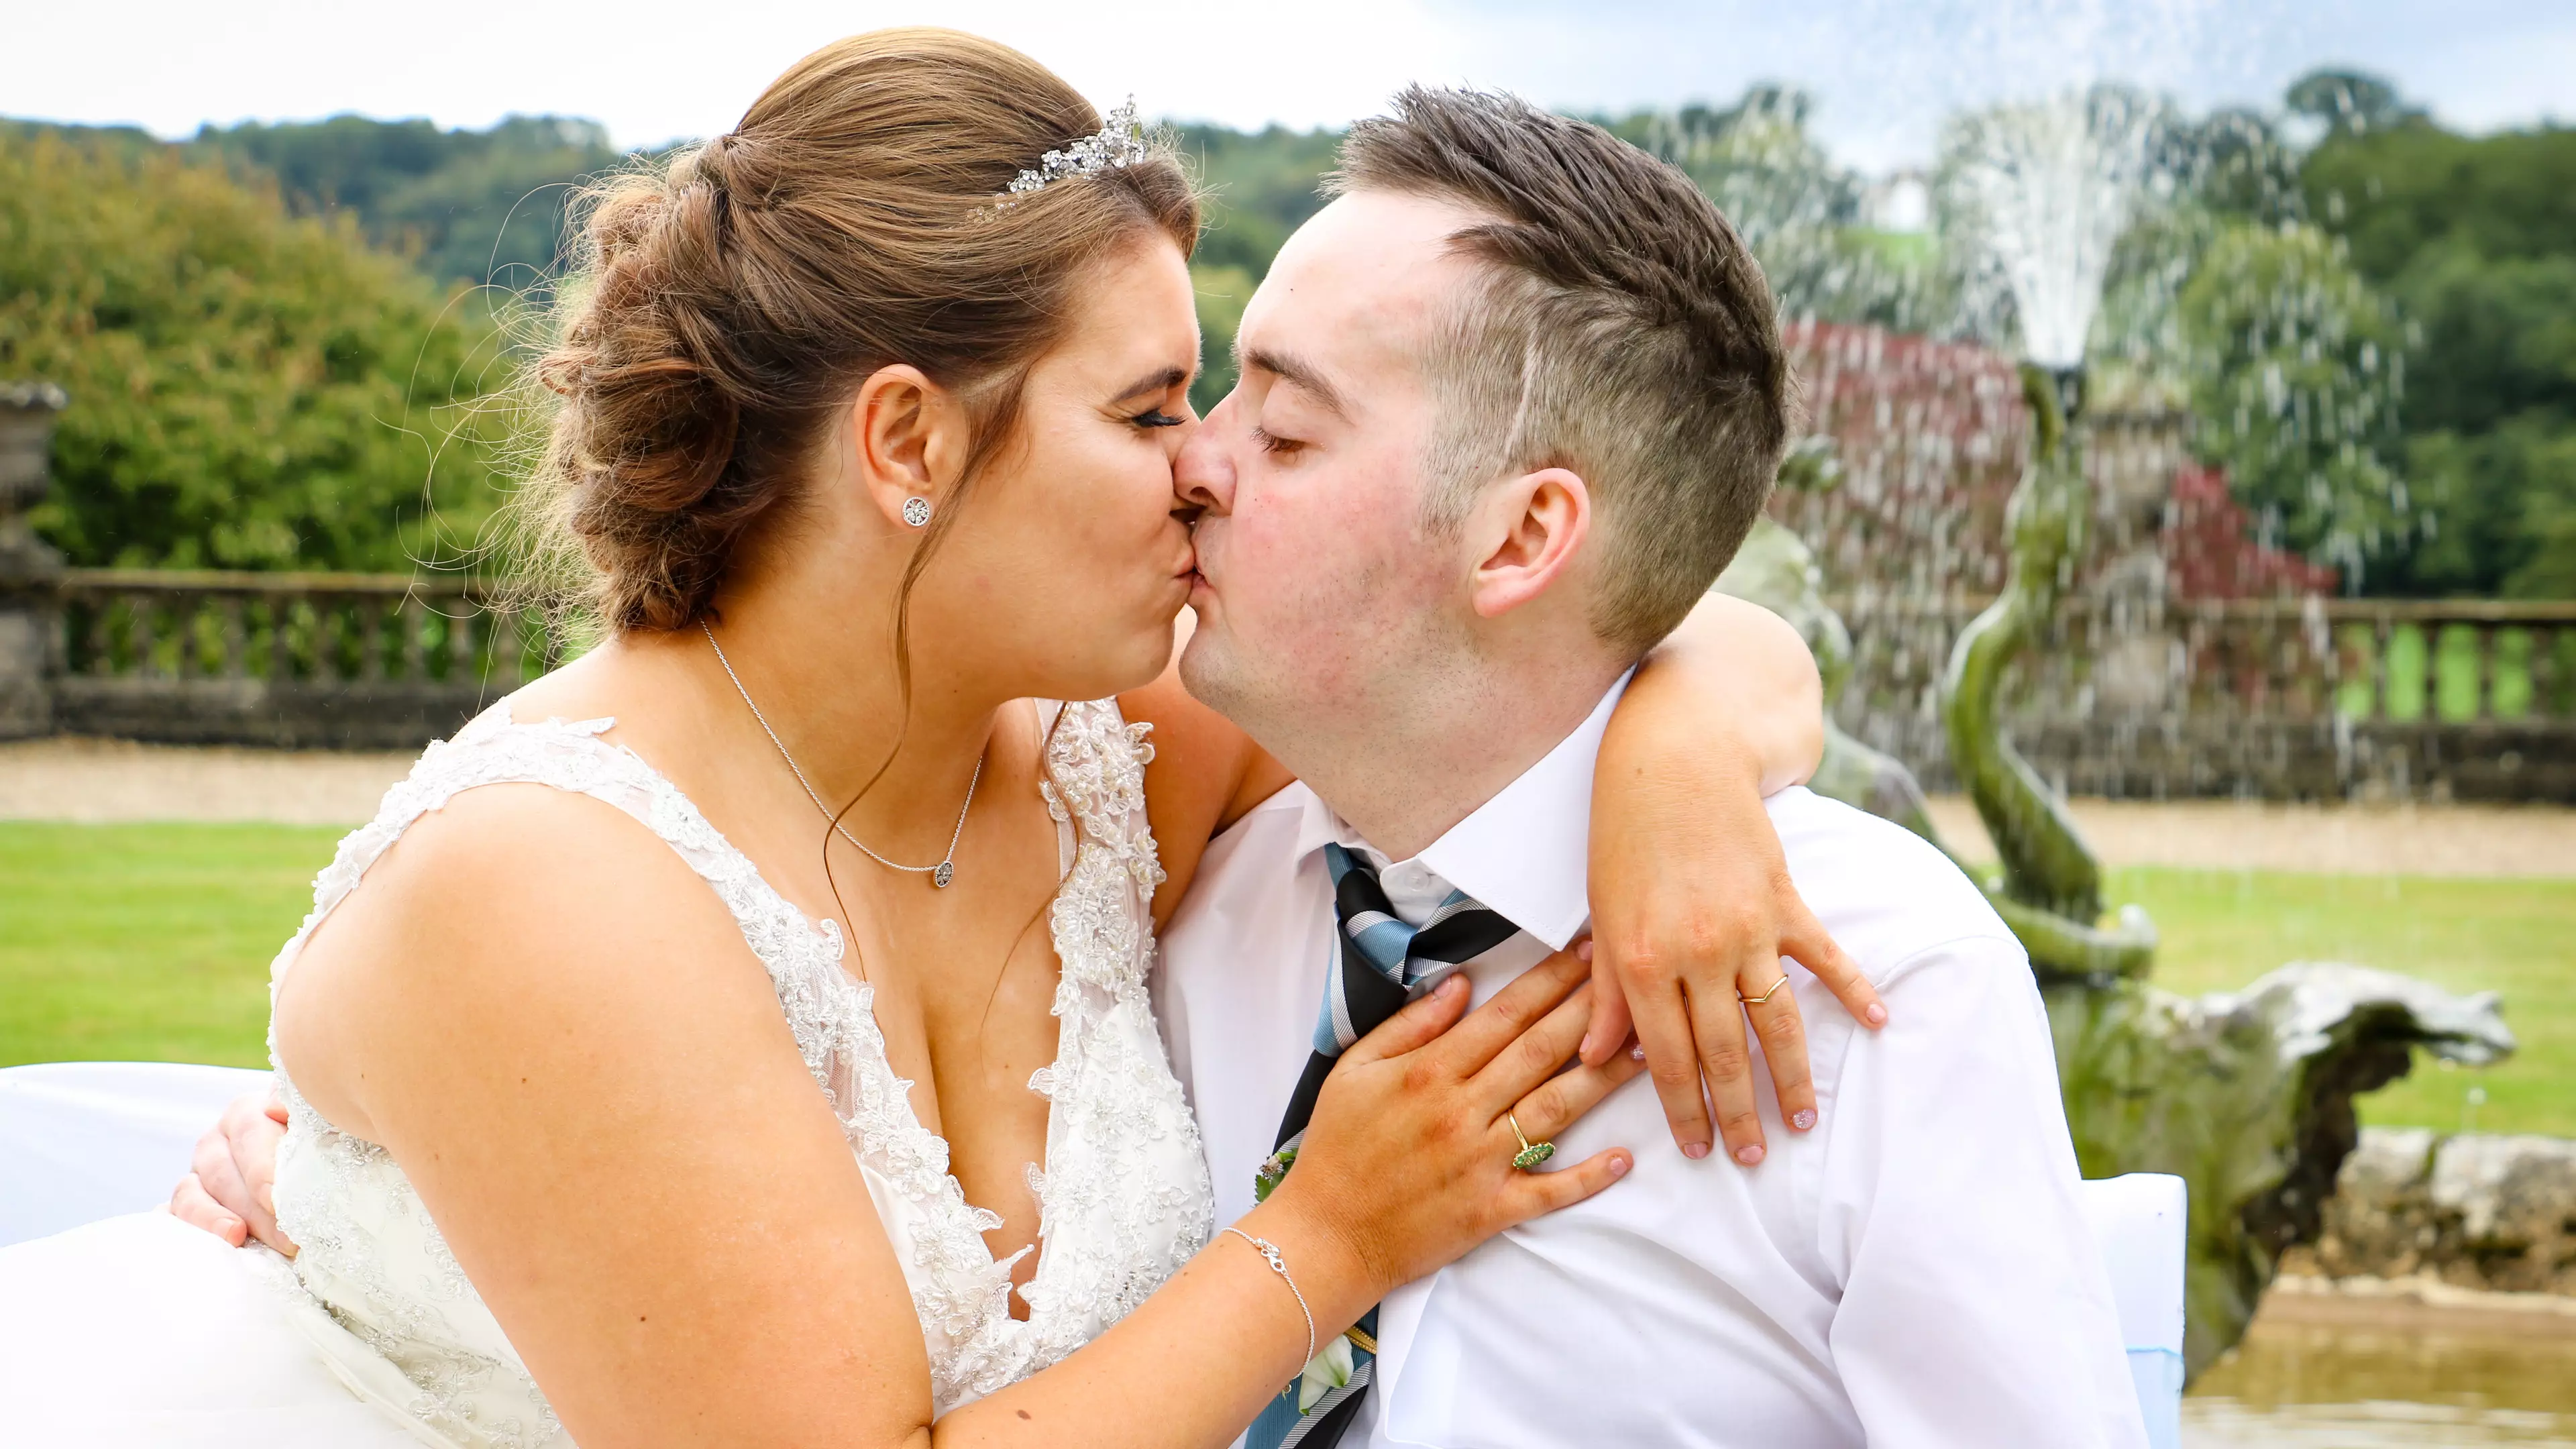 ​Dying Man Marries Love Of His Life After Family And Friends Rally To Donate